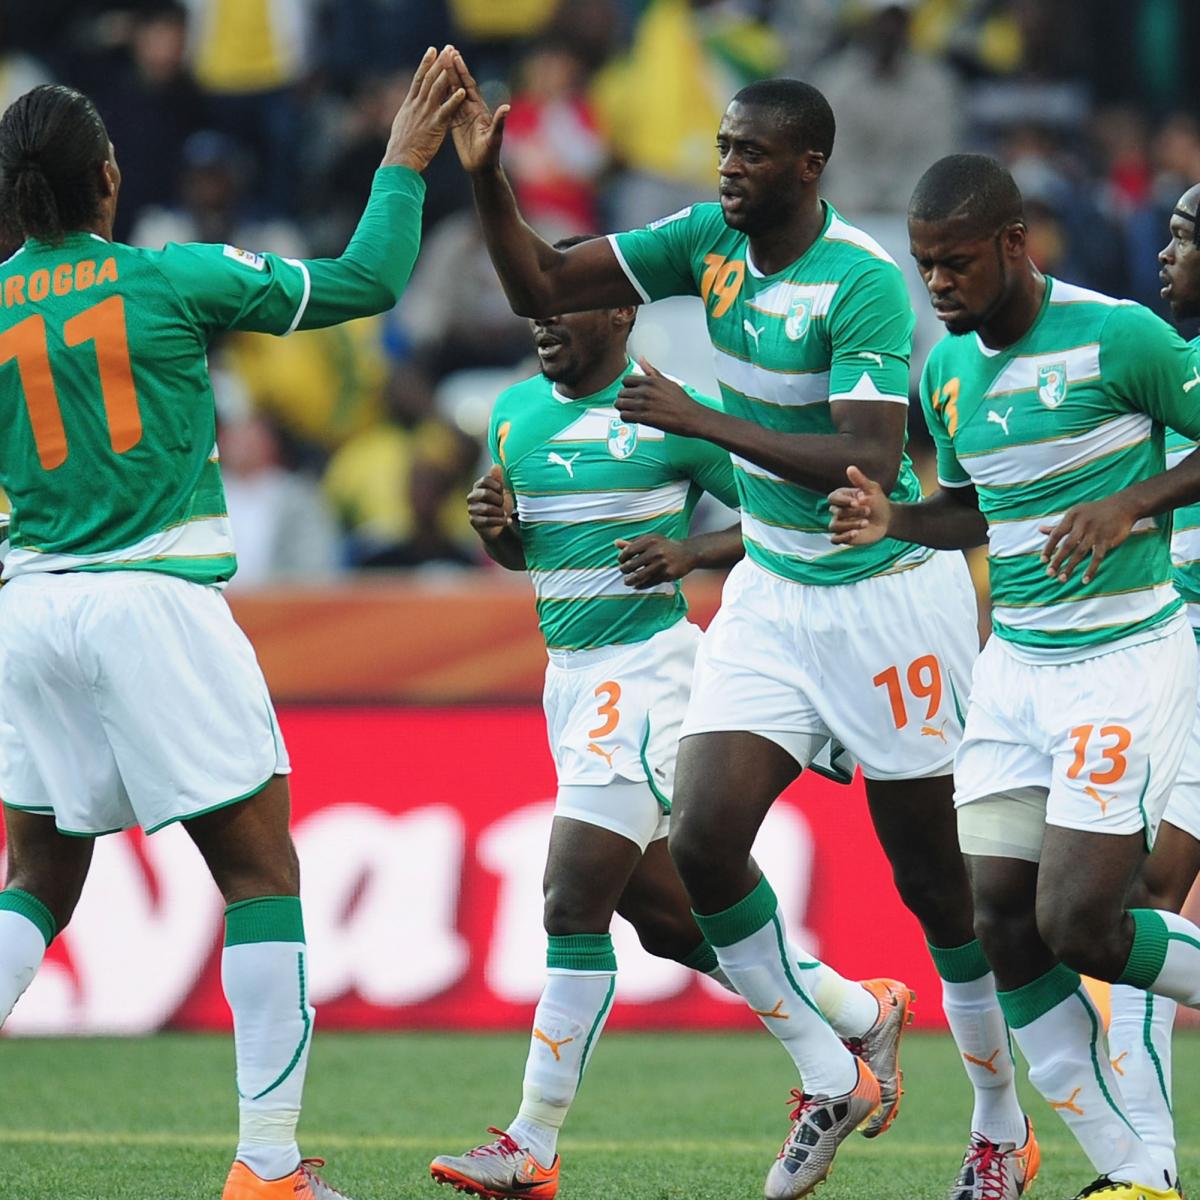 Africa Cup of Nations 2013 TV Schedule: Day 4 Live Stream Info and